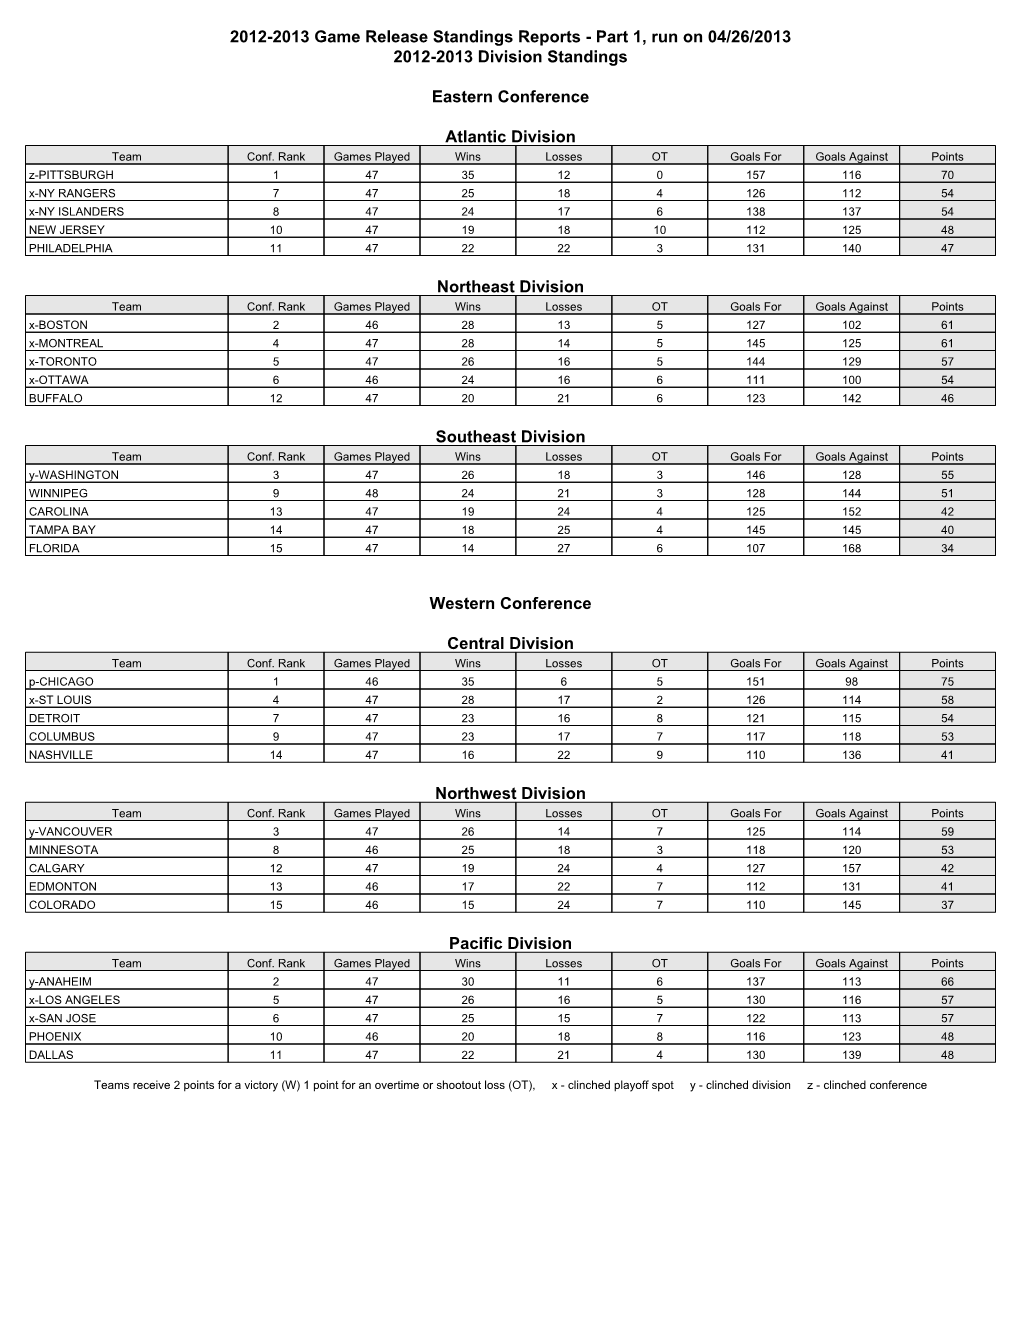 2012-2013 Game Release Standings Reports - Part 1, Run on 04/26/2013 2012-2013 Division Standings